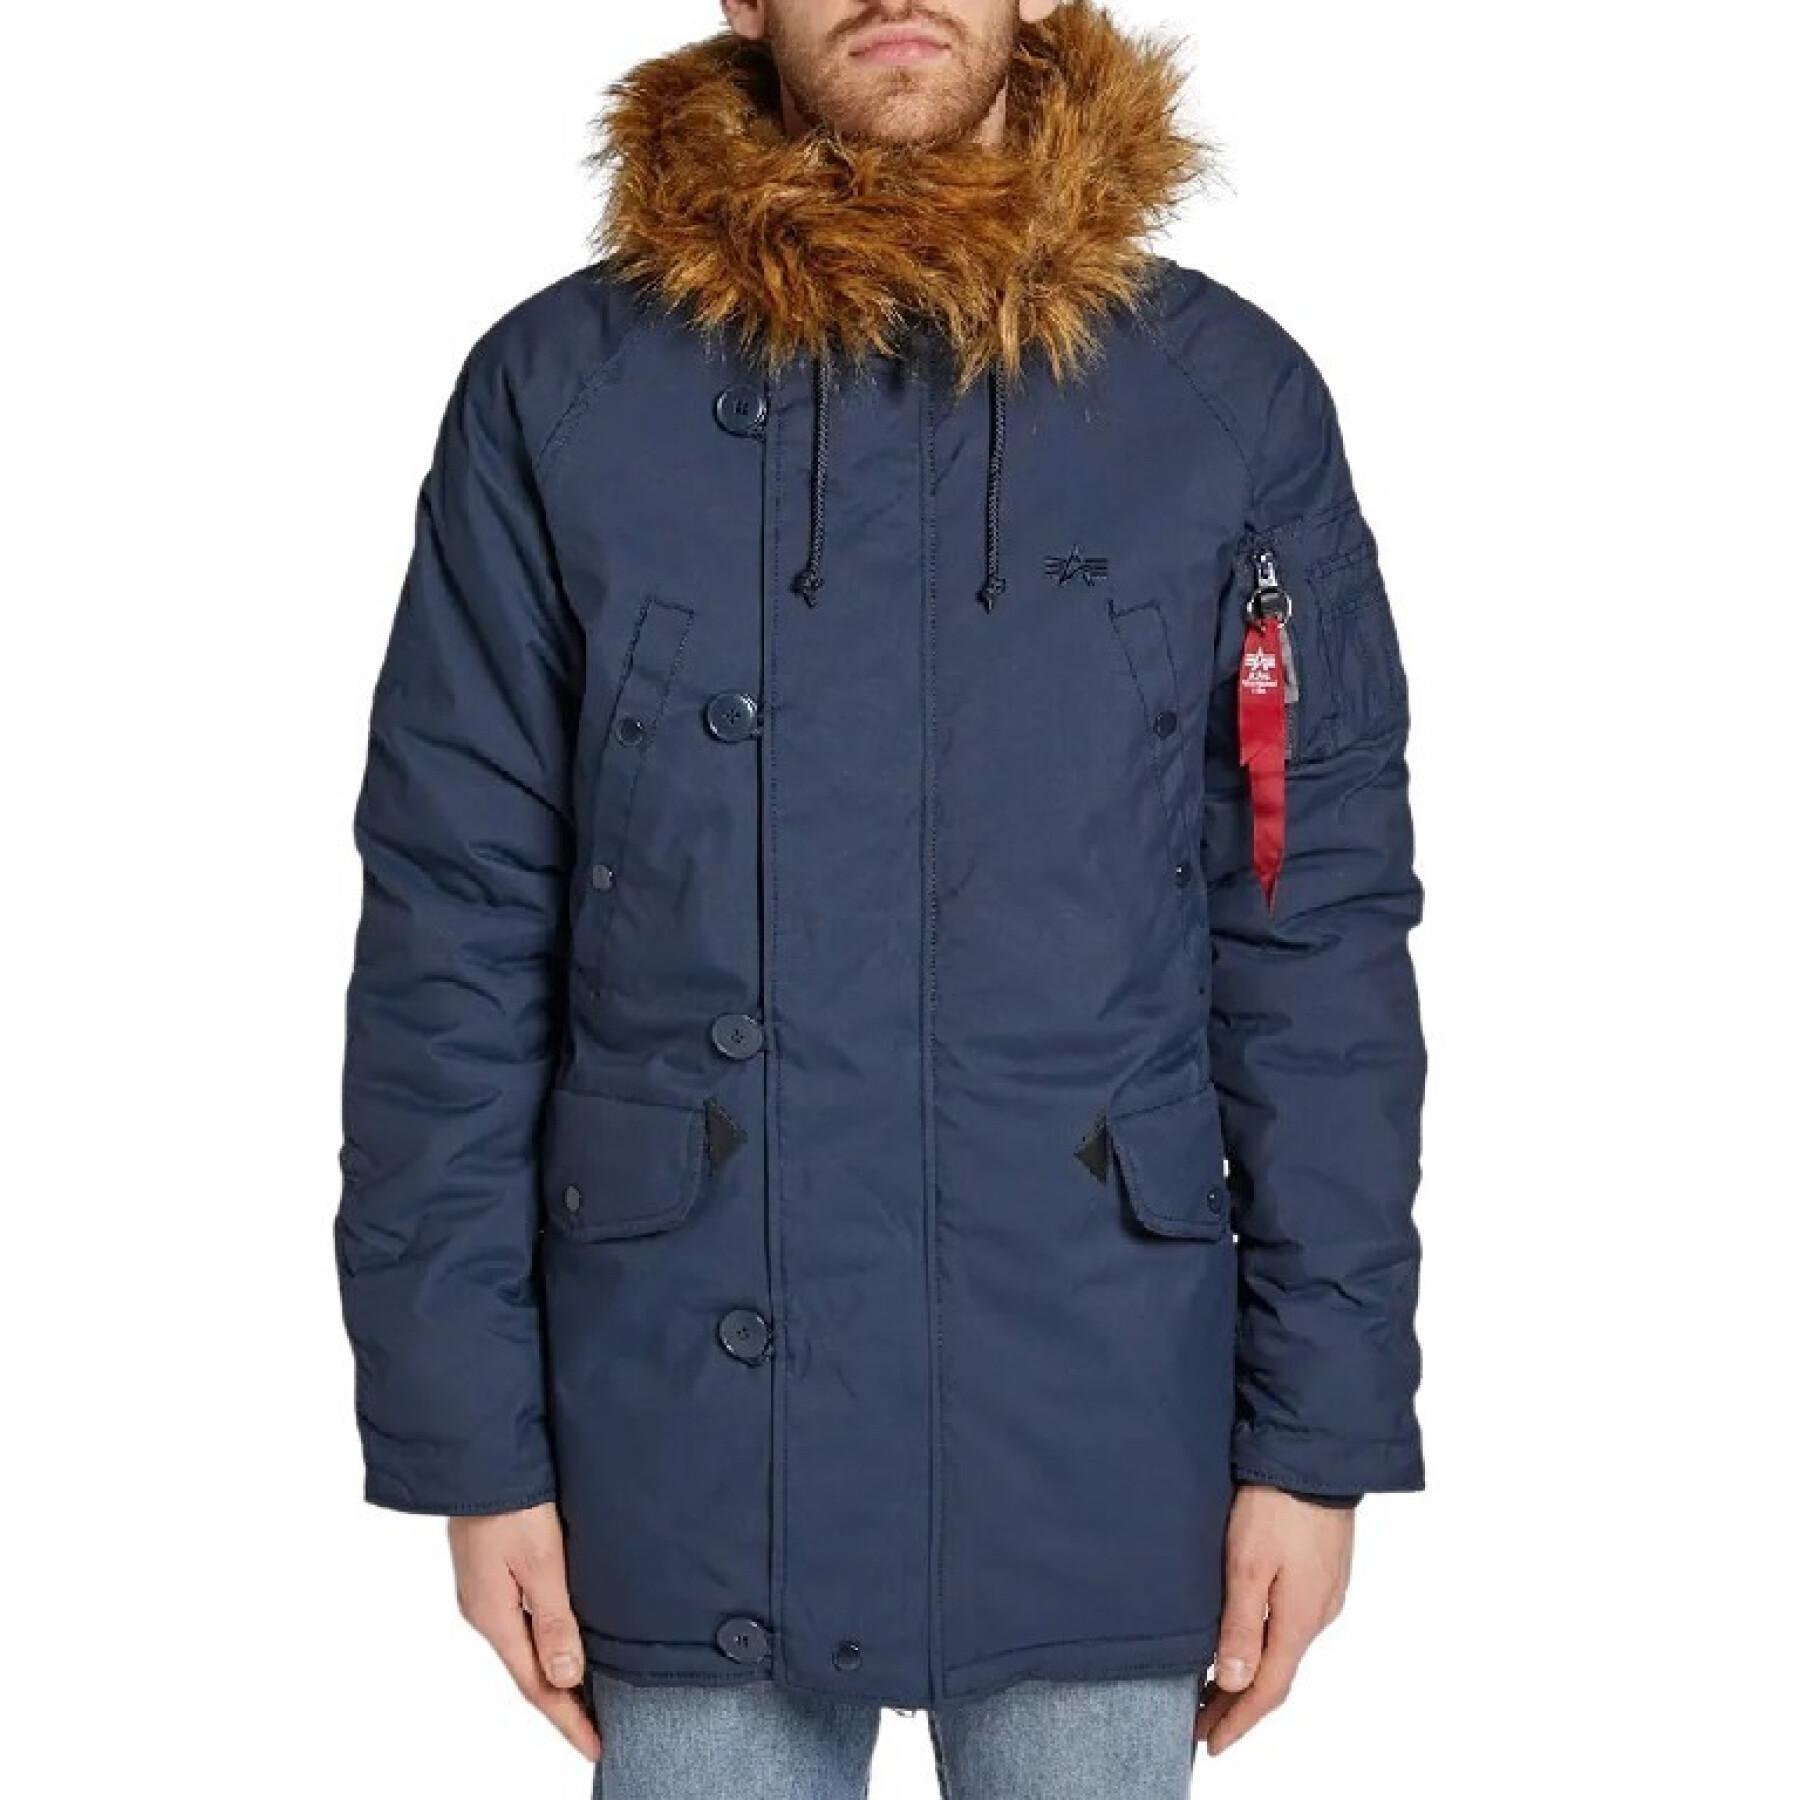 Jacke Alpha Industries Explorer w/o Patches